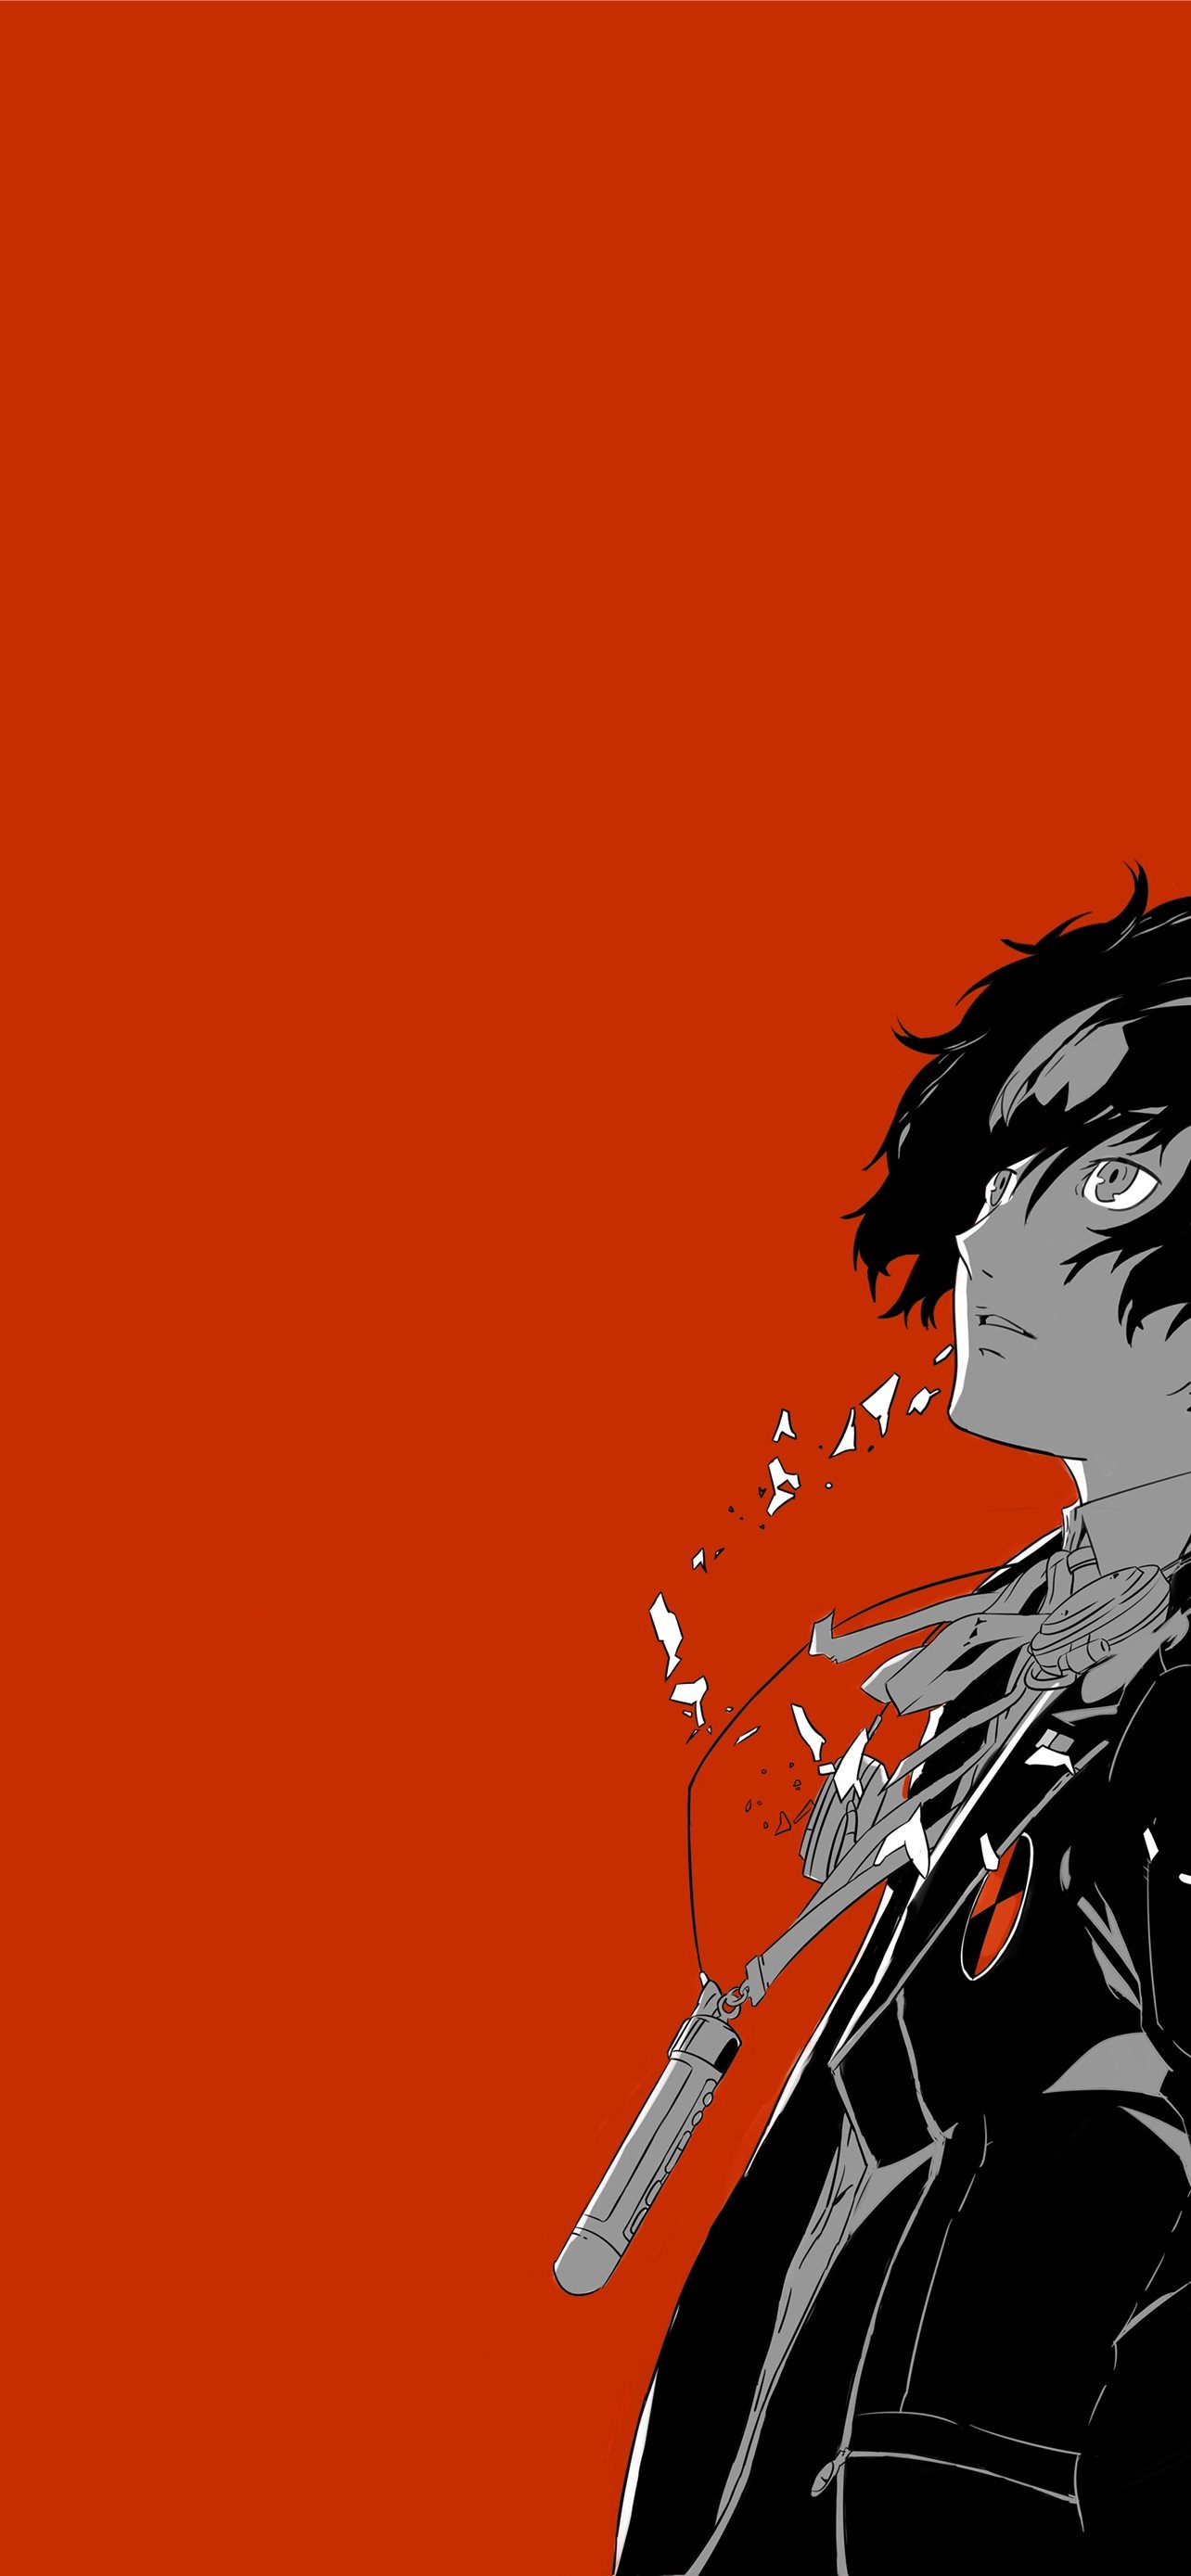 Persona 5 wallpapers HD for desktop backgrounds